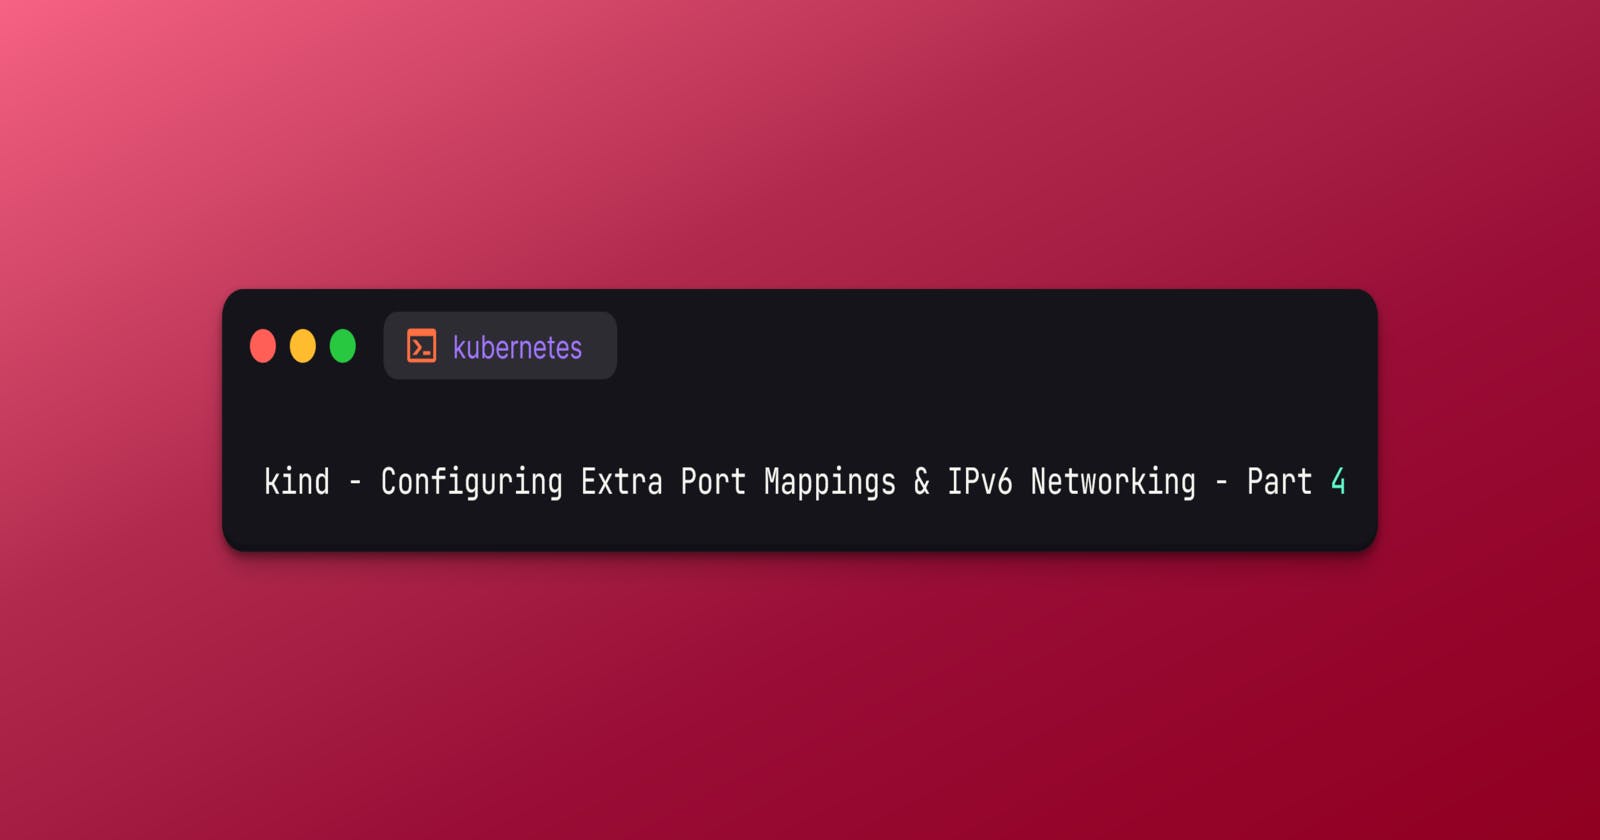 kind - Configuring Extra Port Mappings & IPv6 Networking - Part 4